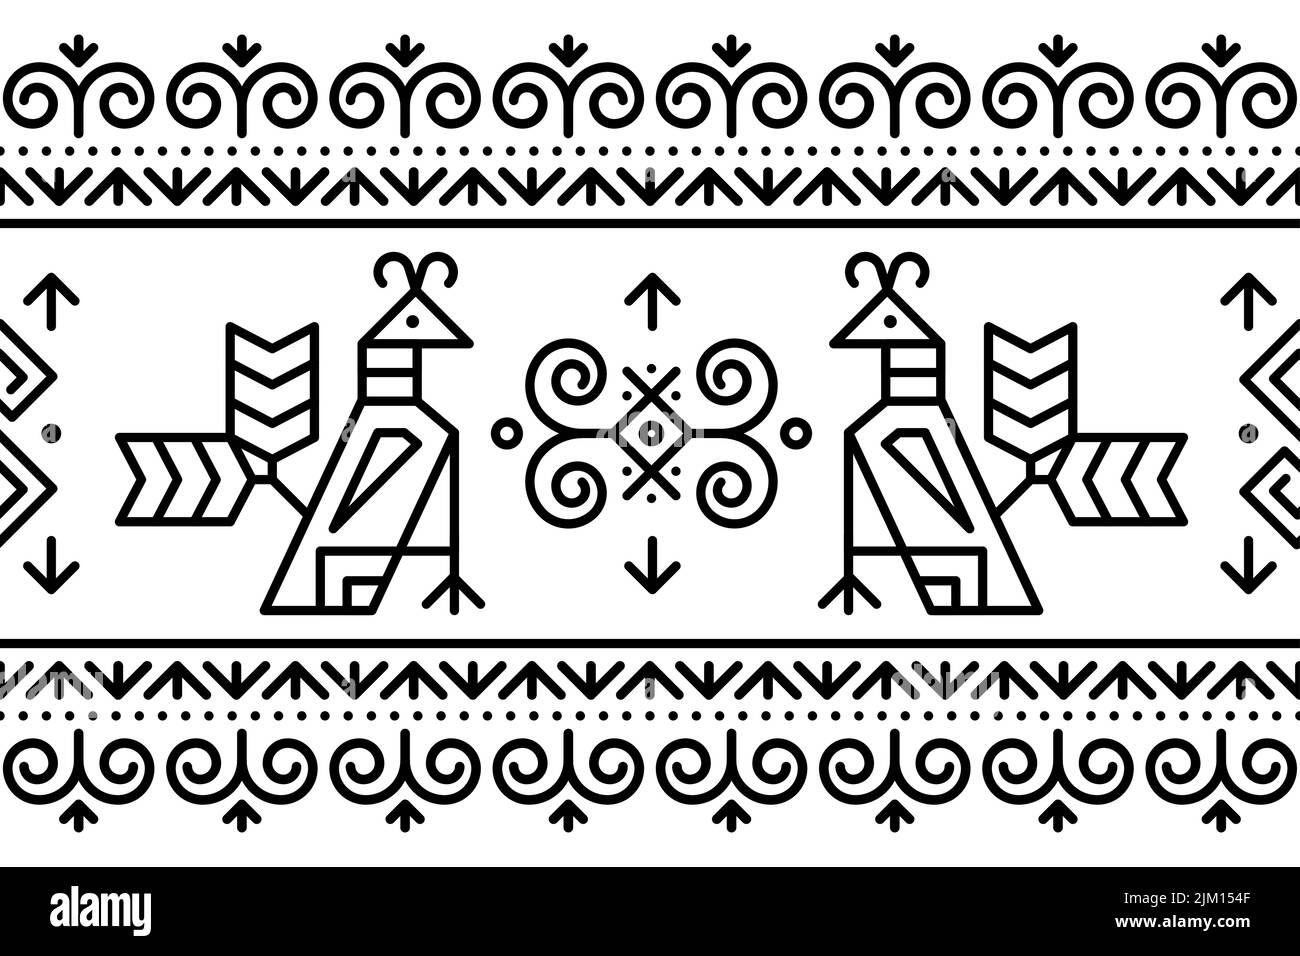 Slovak tribal folk art vector seamless geometric long horizontal pattern with brids swirls, and geometric shapes inspired by traditional painted art f Stock Vector